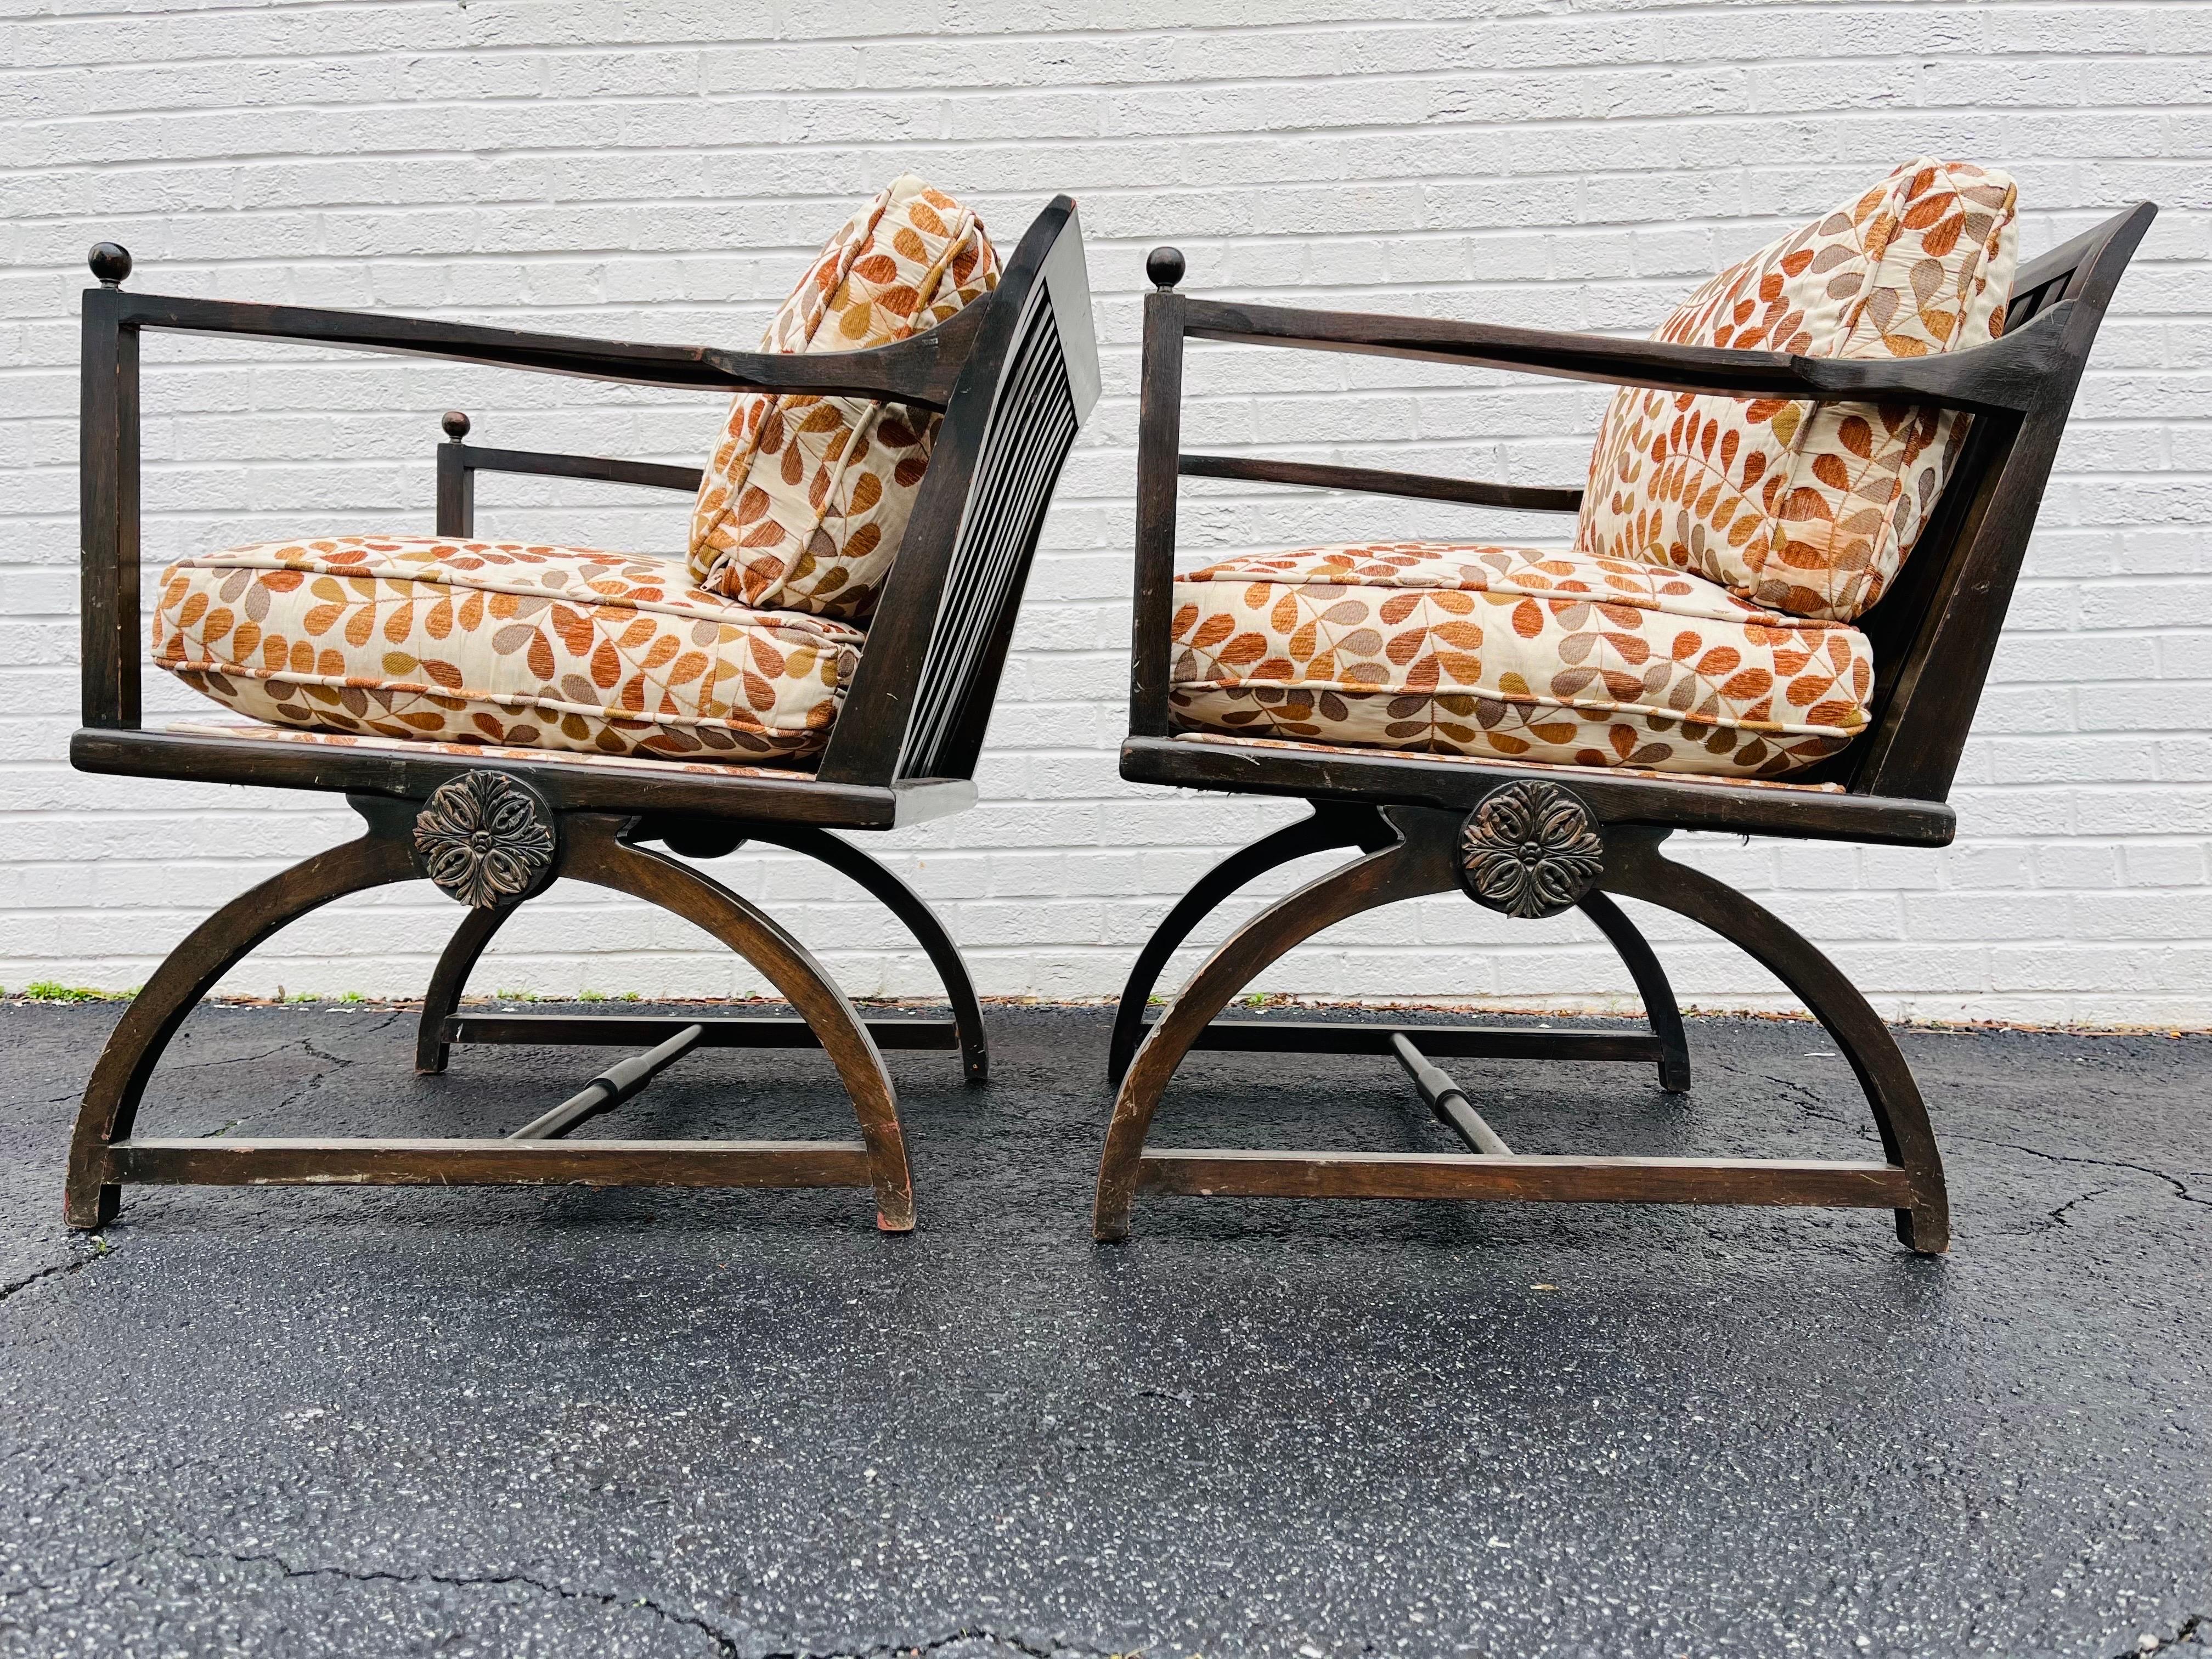 A vintage, possibly antique, pair of wood slat back chairs with a Weiner Werkstatte / Vienna Secession sensibility. This pair of interesting chairs each has a wood slat back, arms culminating in ball finials and a semi circle foot base. There is an